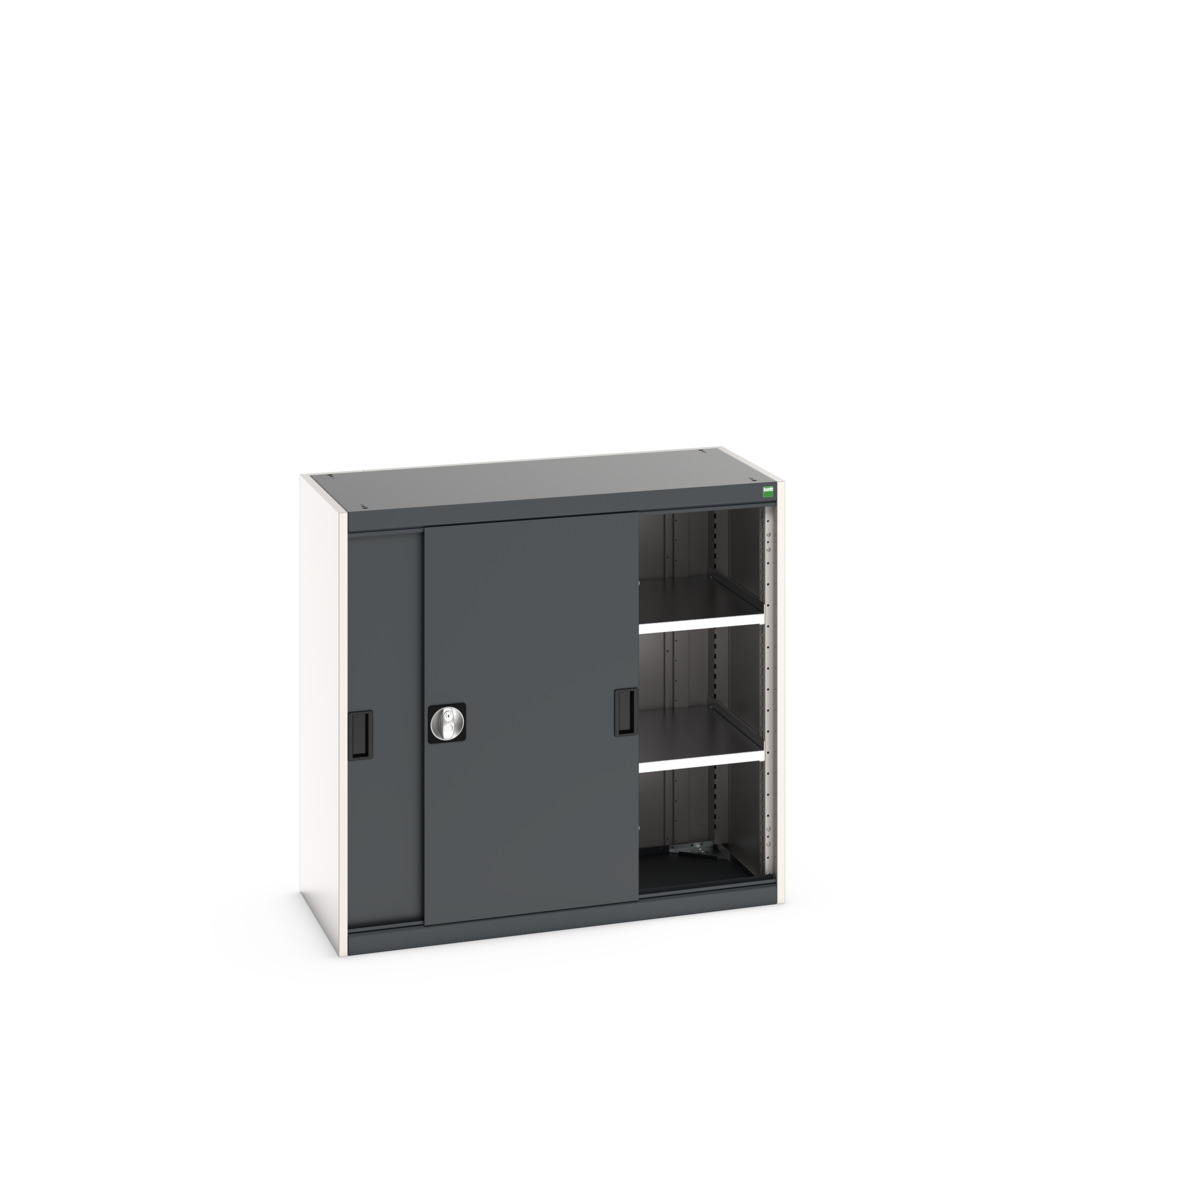 40013068.19V - Armoire Cubio SMS-10510-1.1